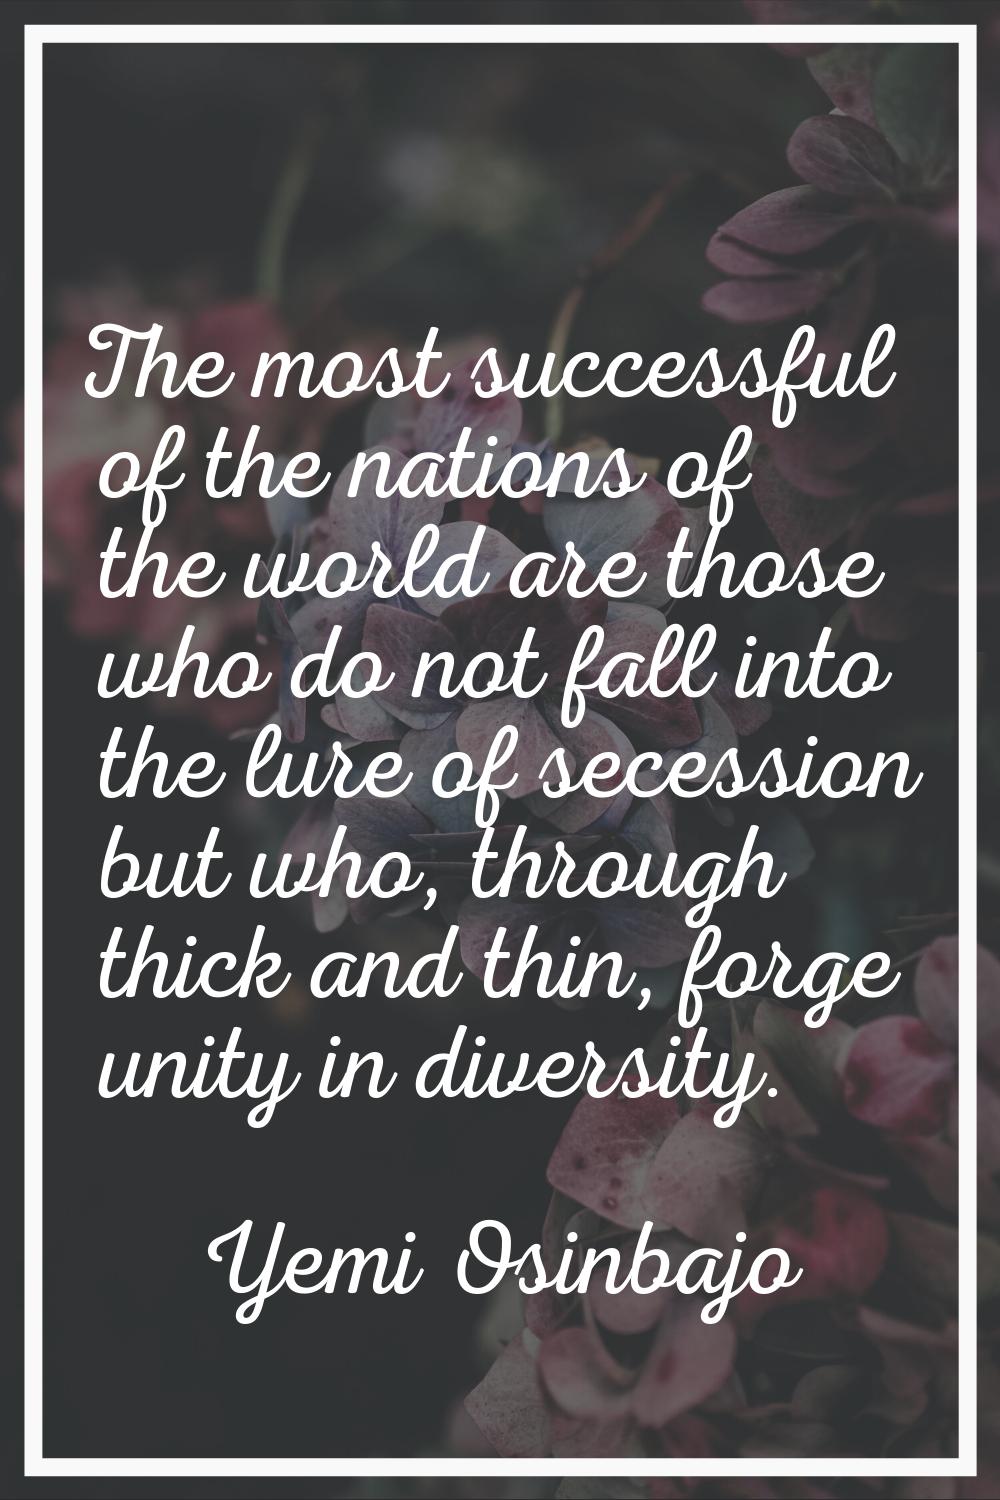 The most successful of the nations of the world are those who do not fall into the lure of secessio